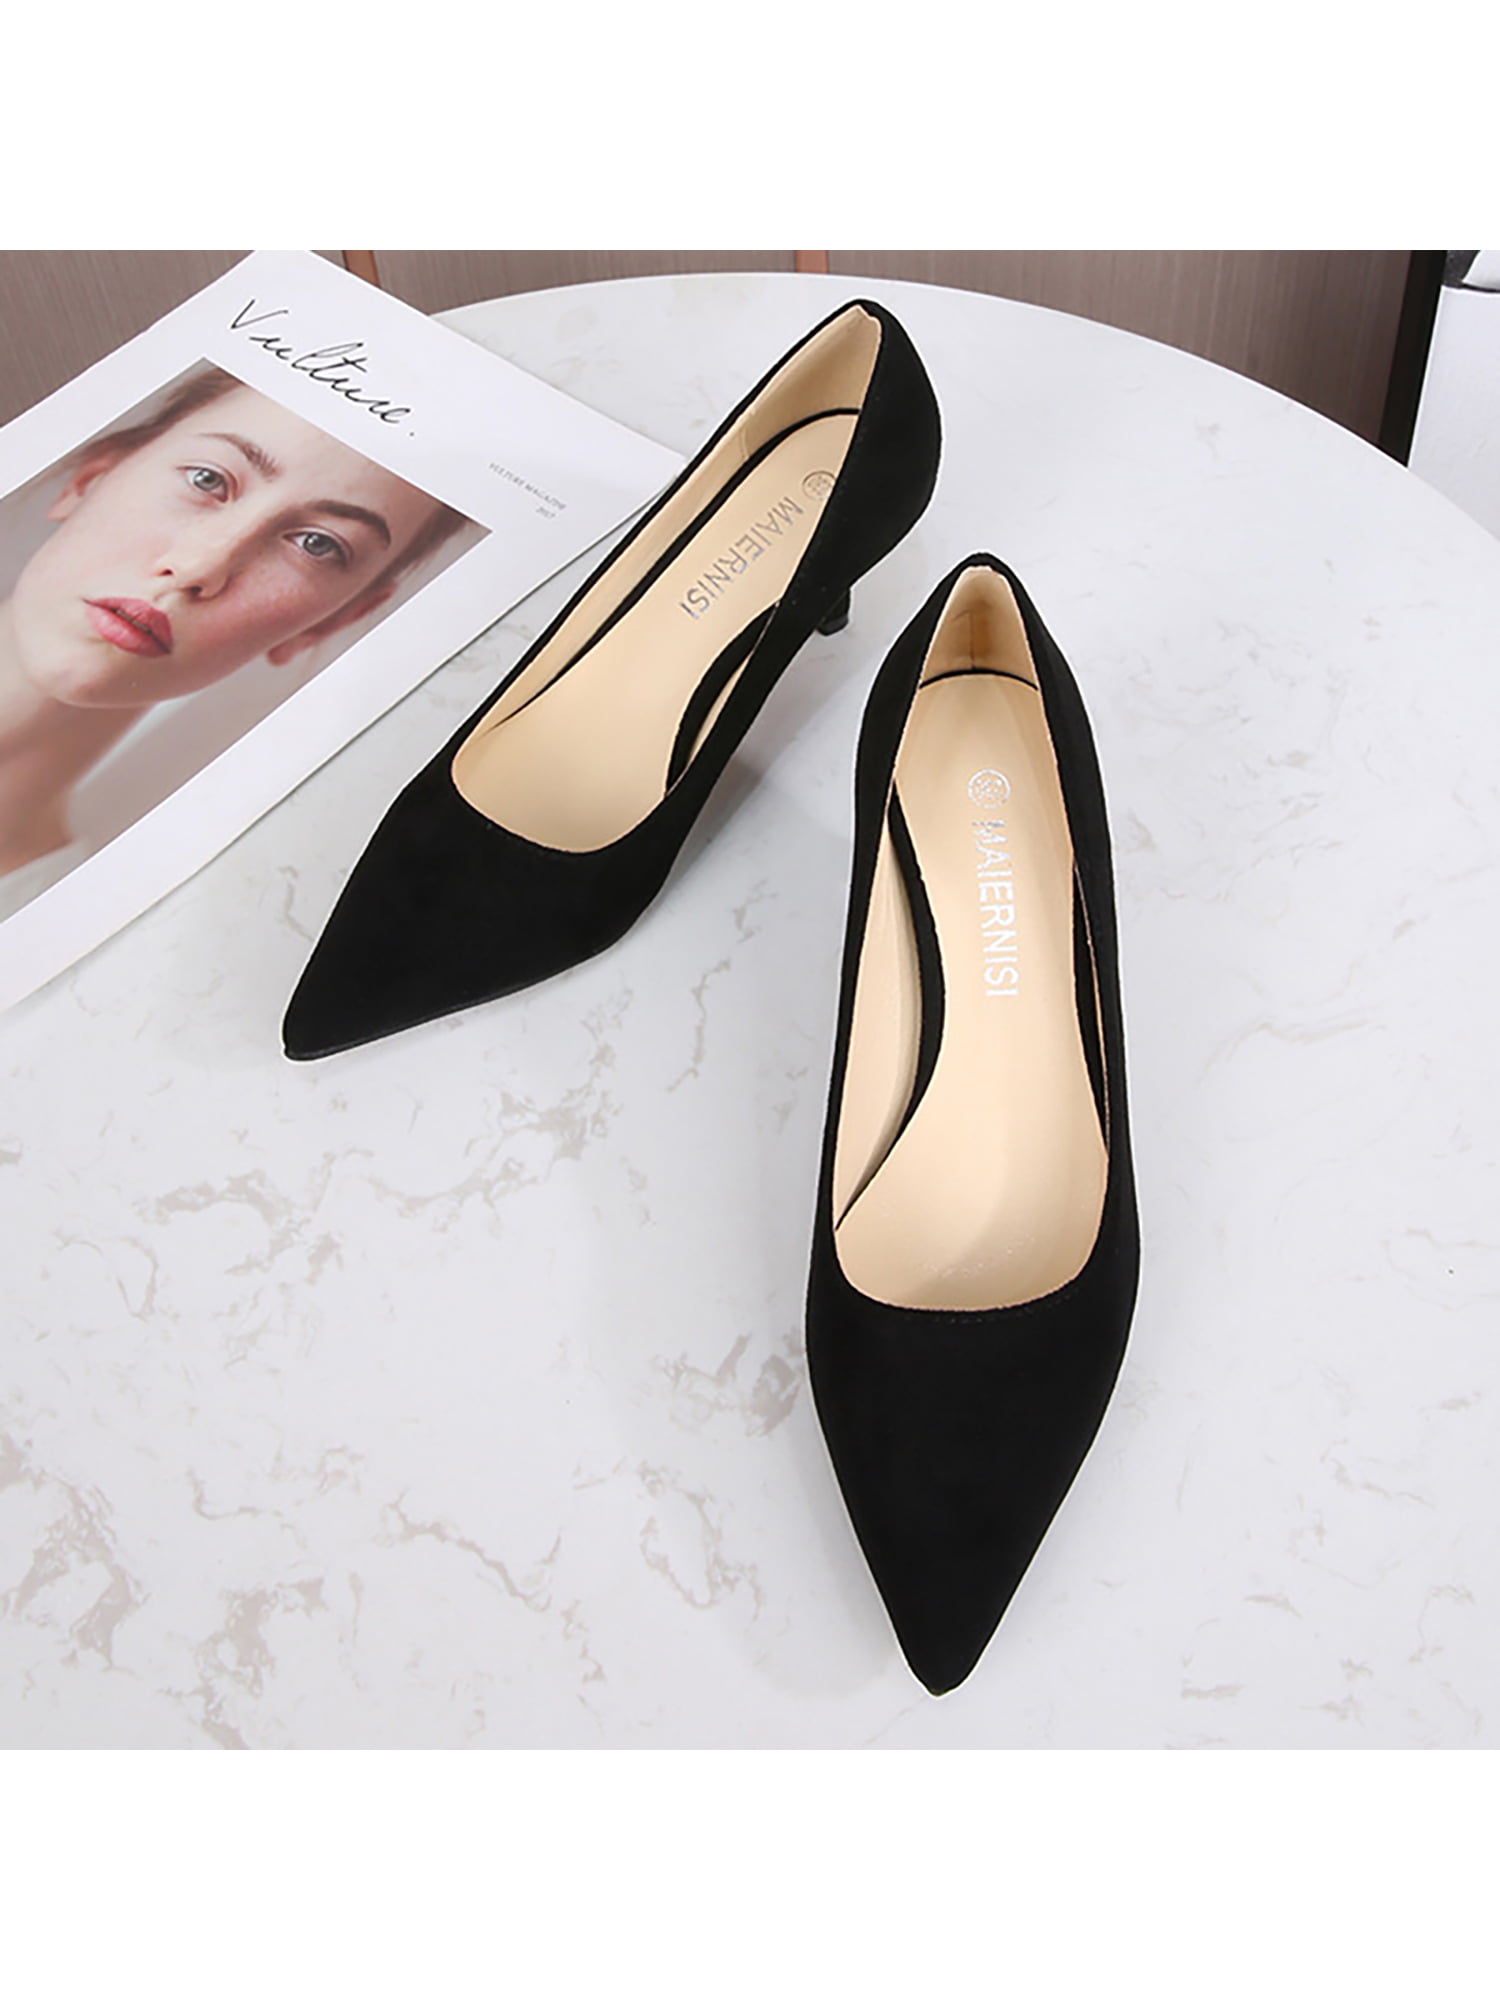 Lhked Women's Pointed Toe Shoes Solid Color Casual Comfortable Low-heel  Shoes Dress Shoes Size6 - Walmart.com